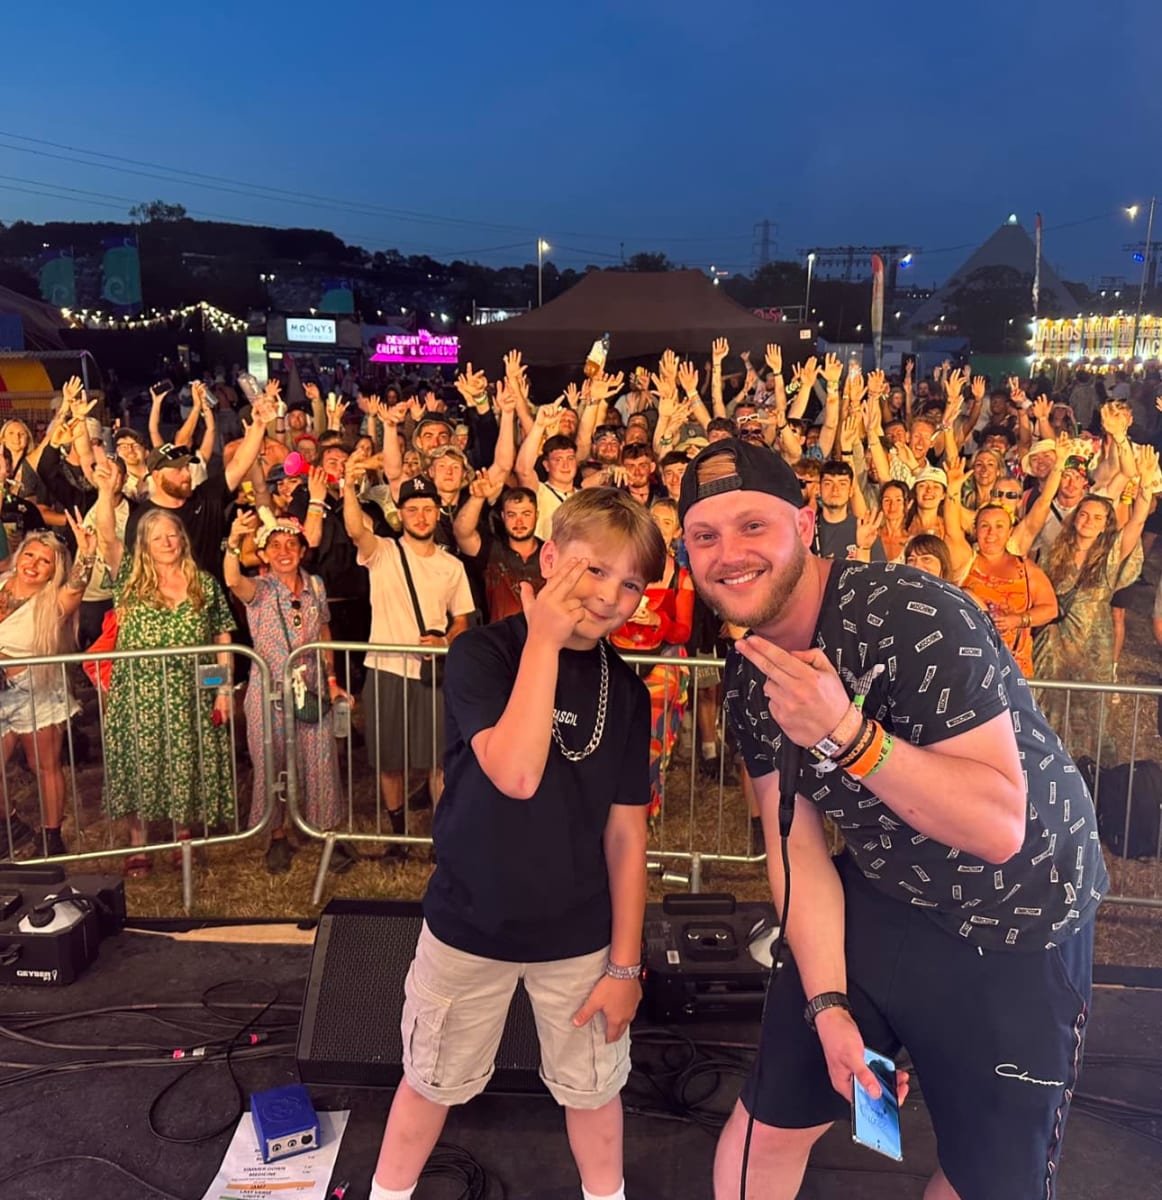 9-12 months-Outdated DJ Turns into Youngest to Ever Carry out at Glastonbury Pageant